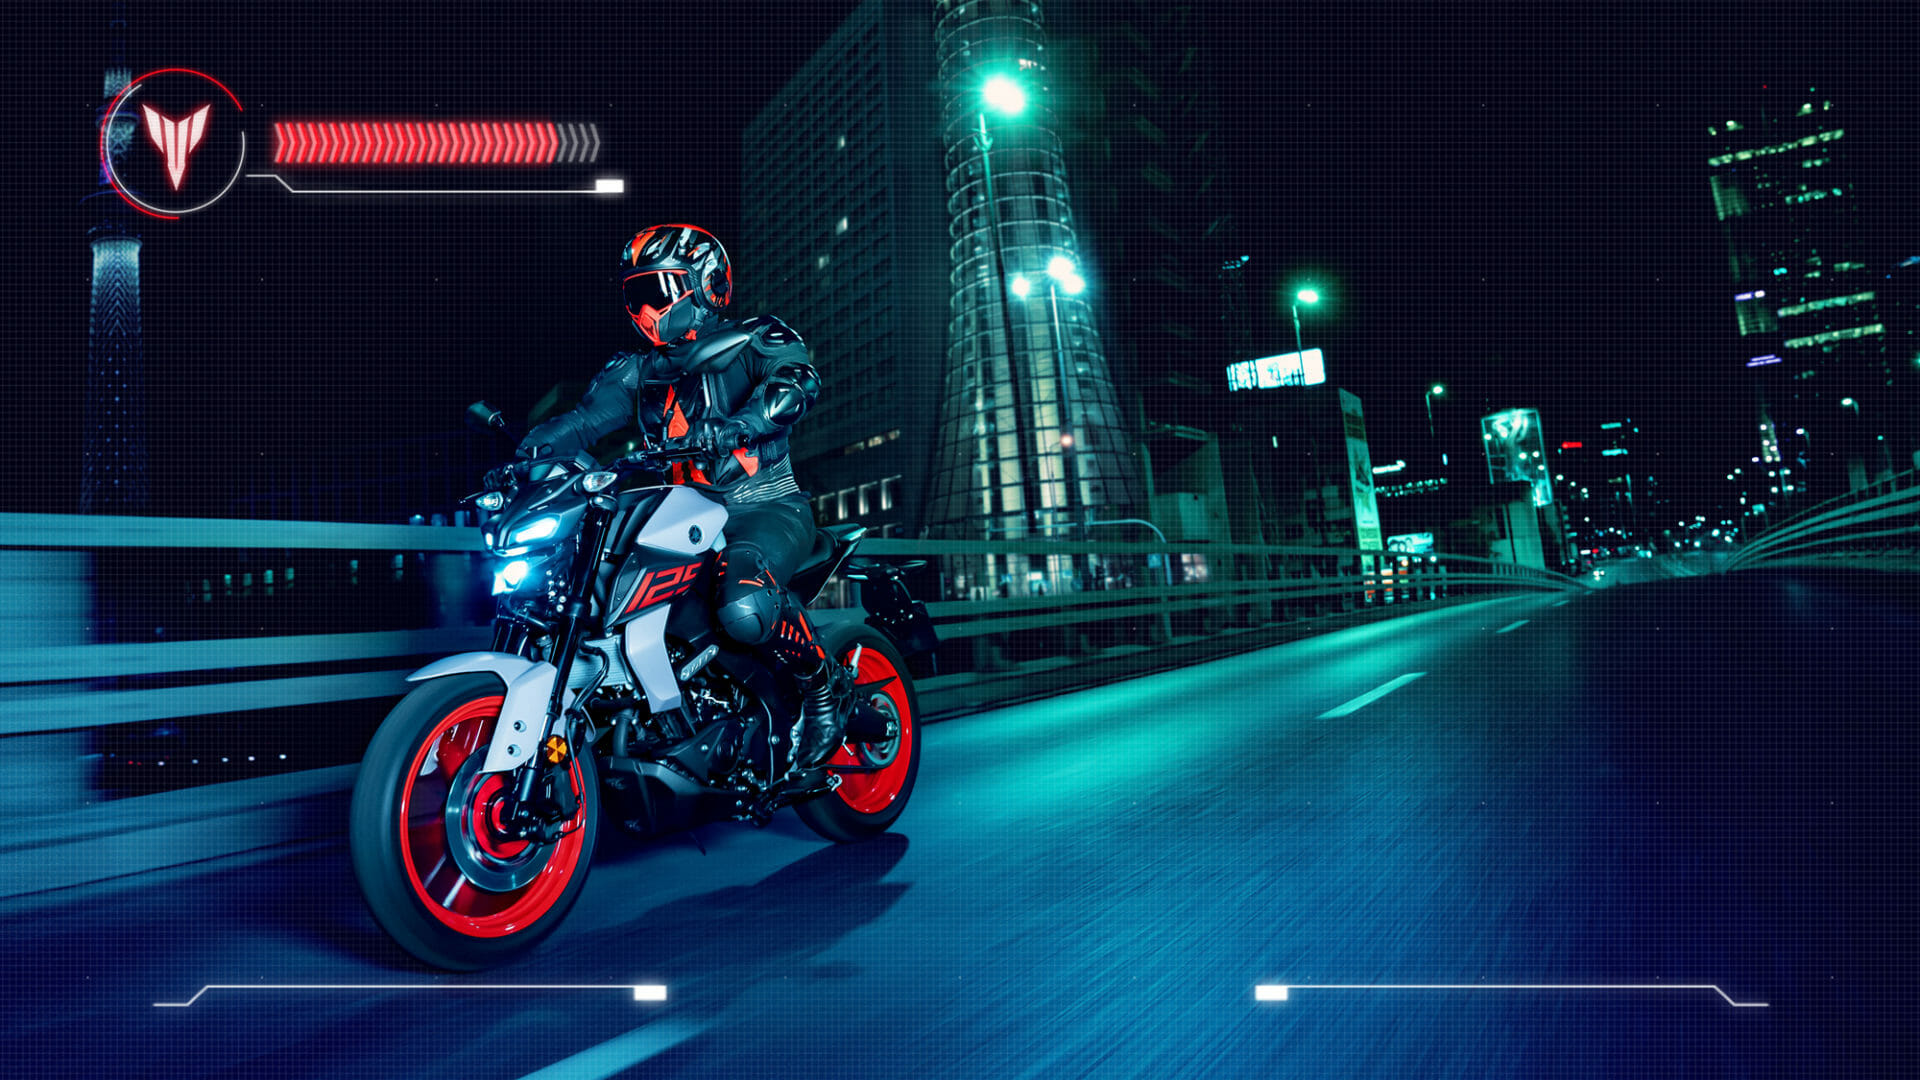 Yamaha Mt 125 For 2020 Presented Motorcycles News Motorcycle